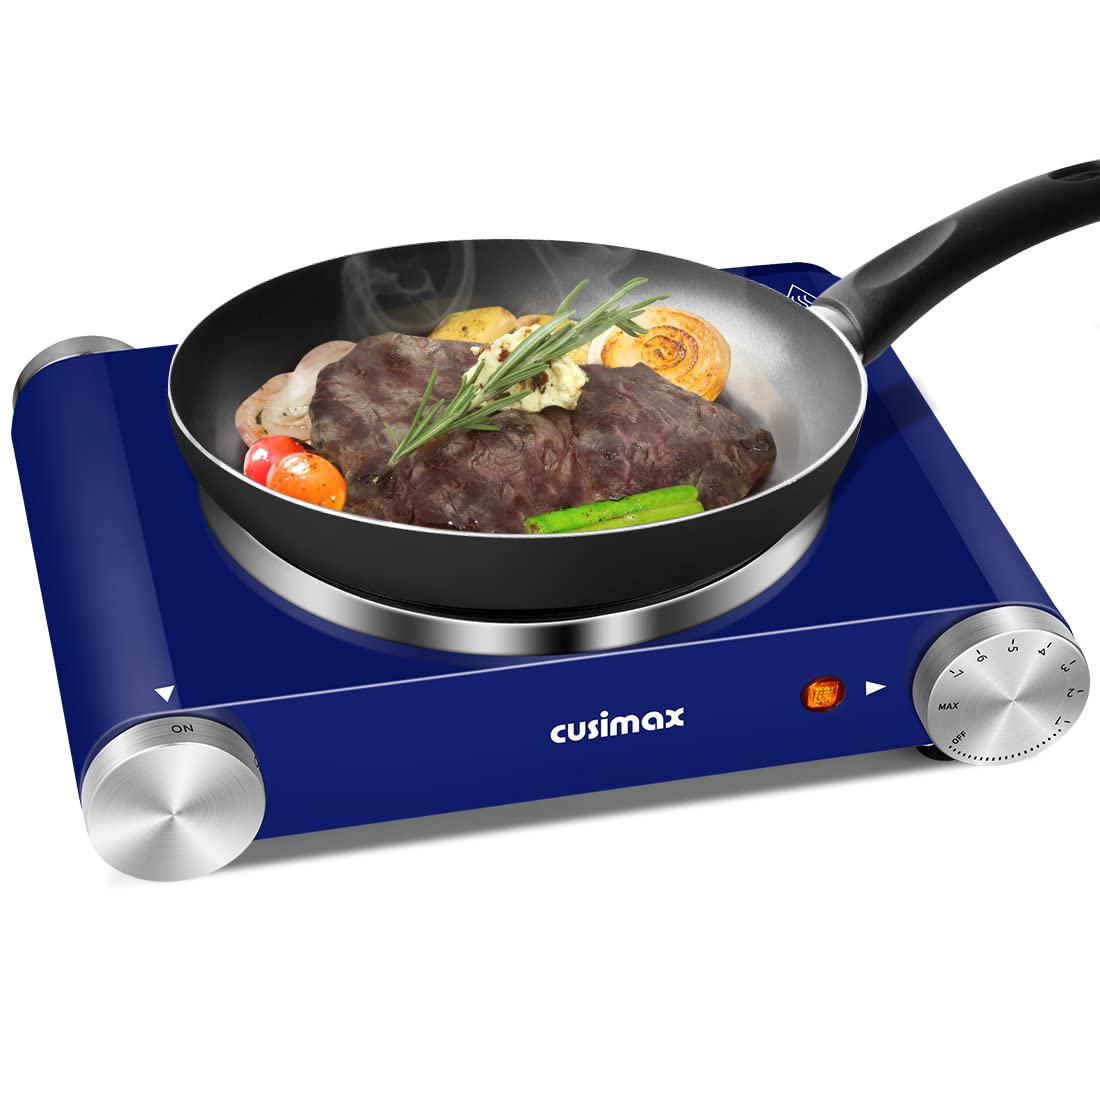 Hot Plate, CUSIMAX Electric burner 1500W Hot Plate for Cooking Single Burner Electric Stove with Heat-up in Seconds Adjustable Temperature Control ...